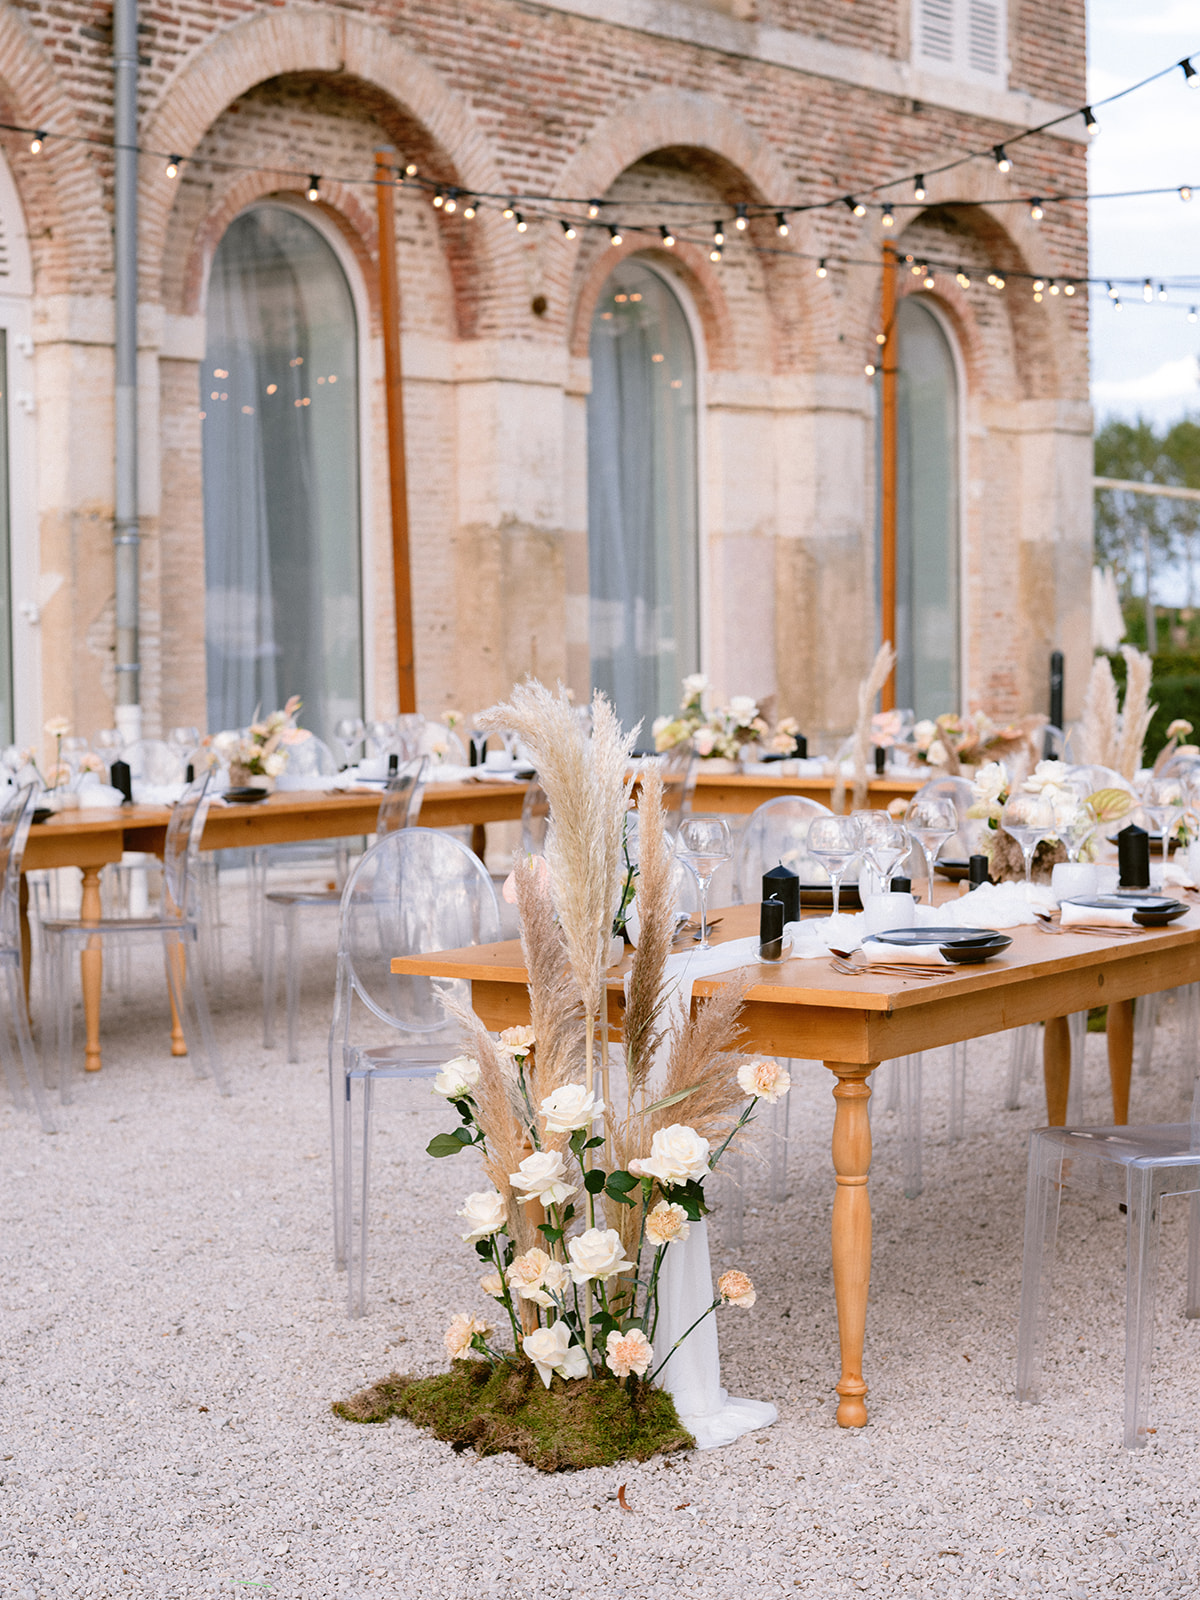 You'll Never Believe That This Three-Day Destination Wedding In France Was Only 40K!